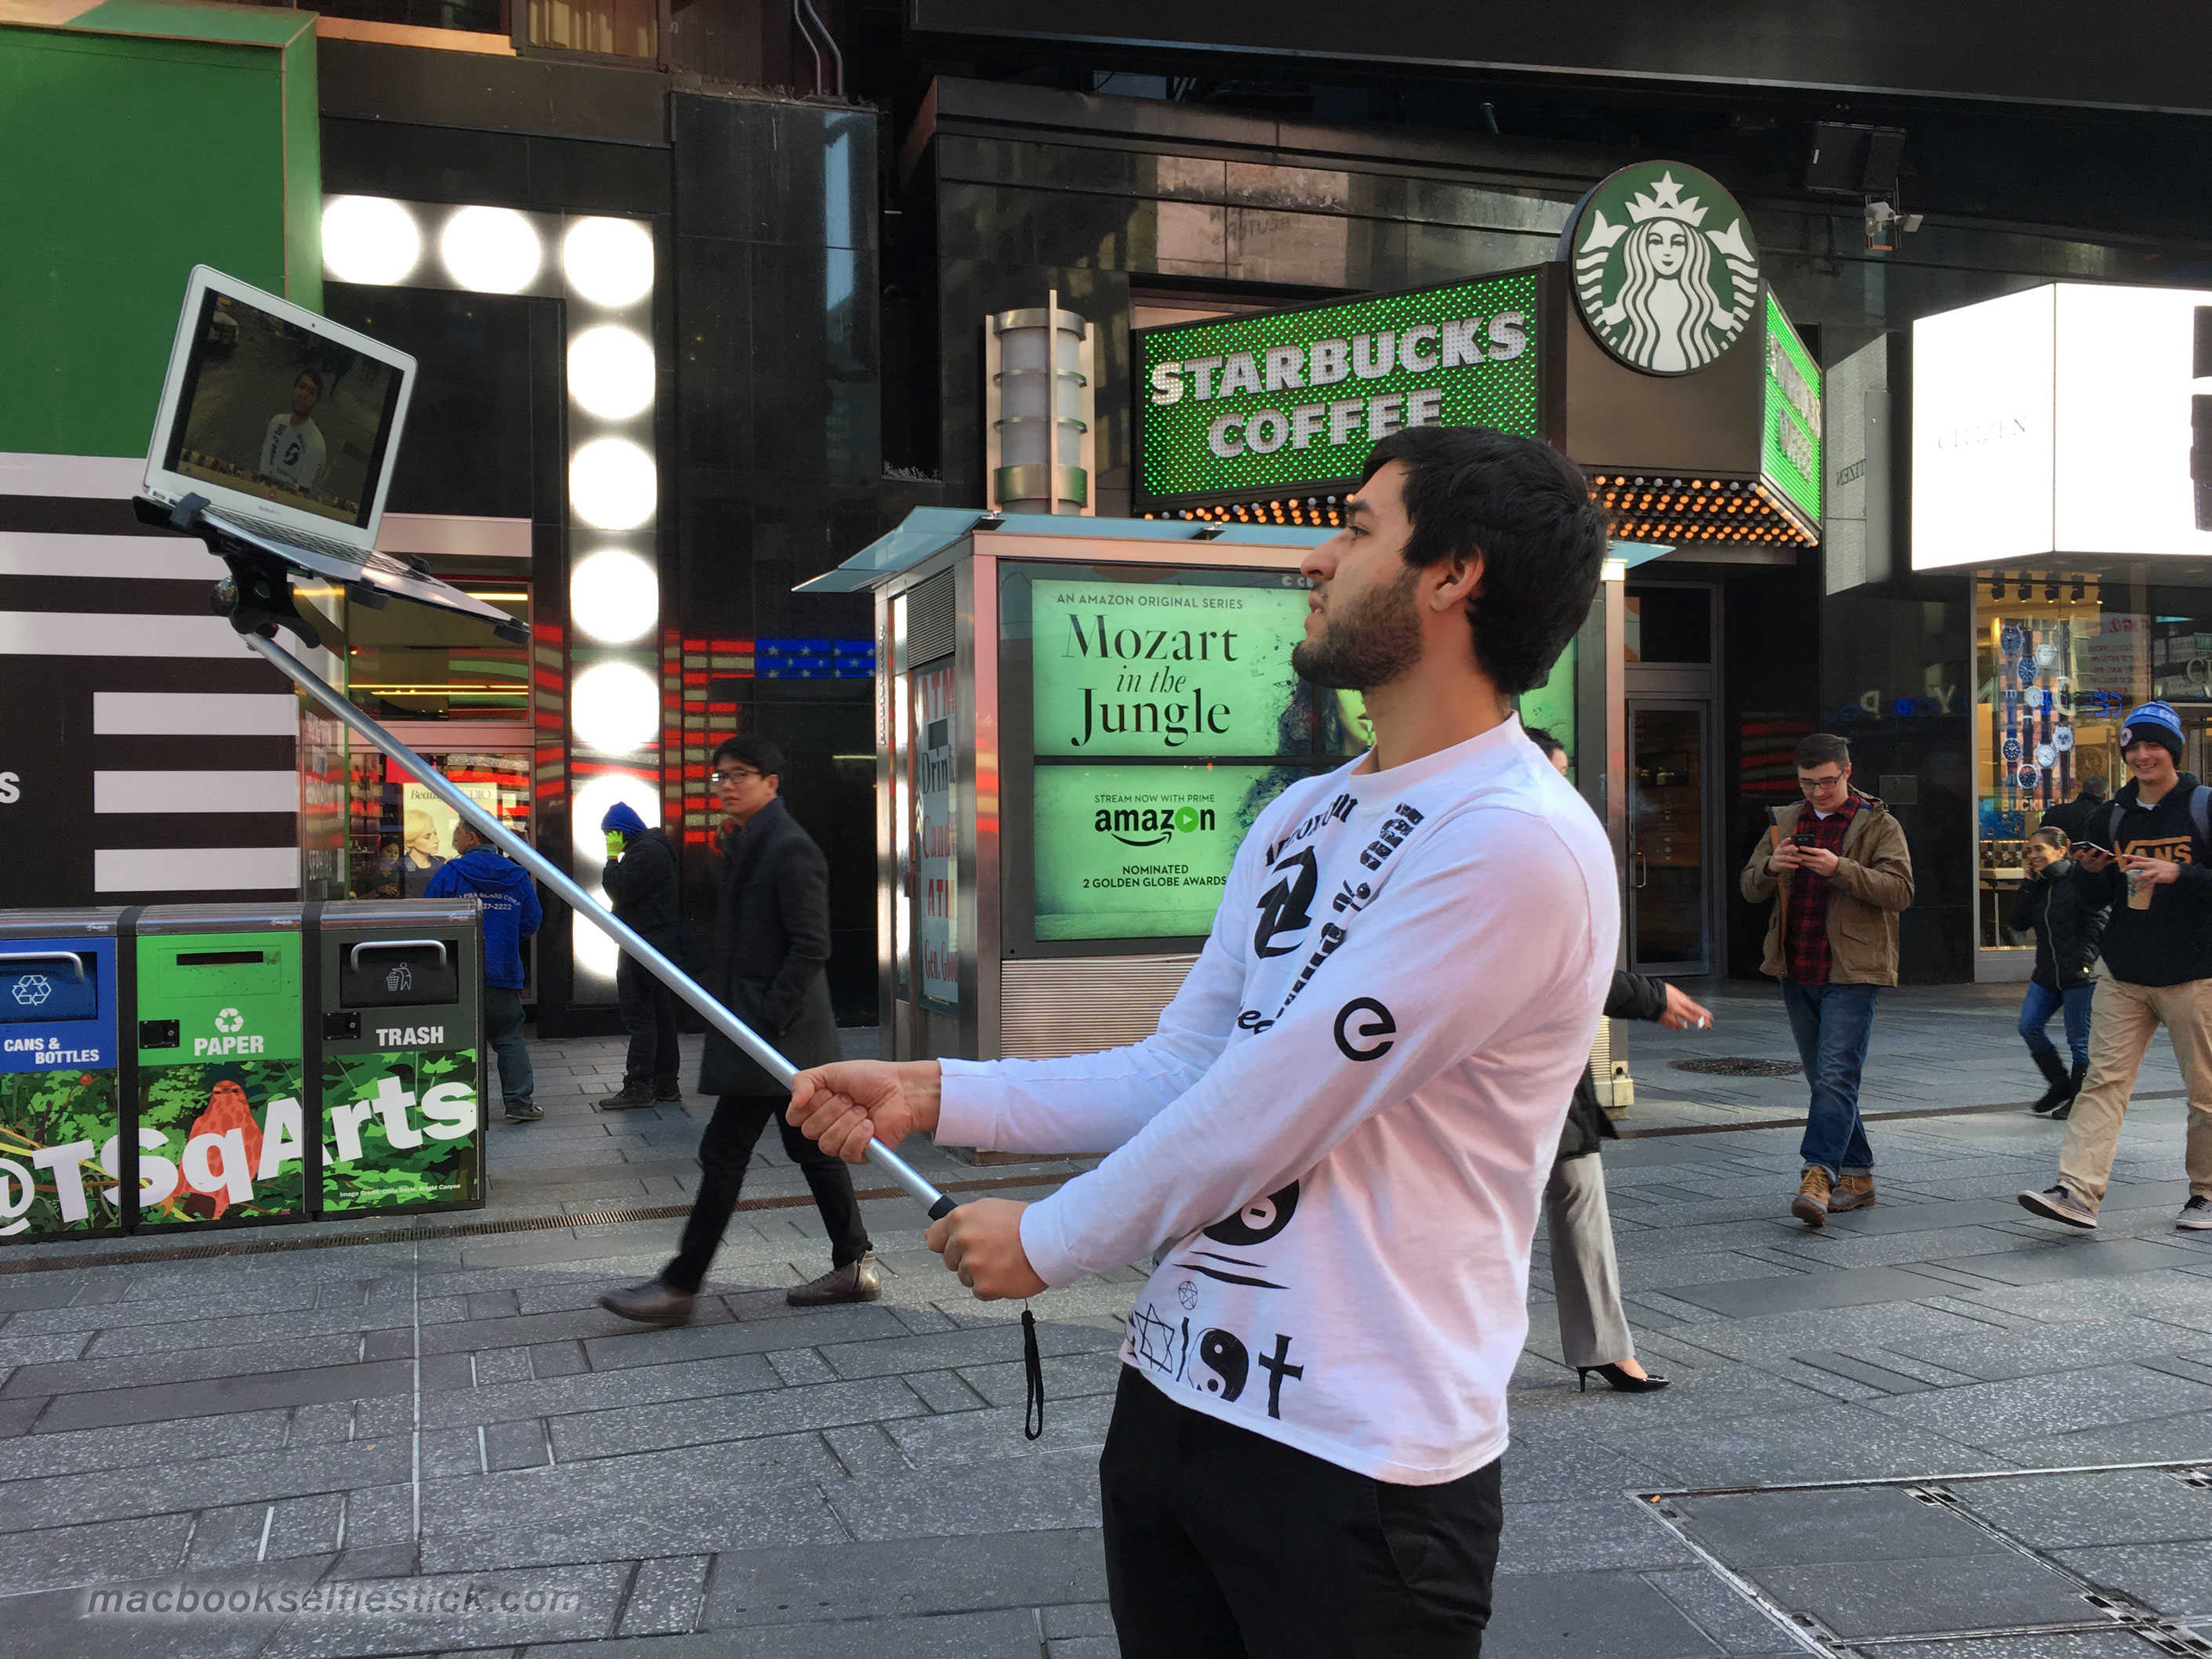 I'll take a double-shot half-caff soy latte with a side of massive MacBook selfie stick, please.